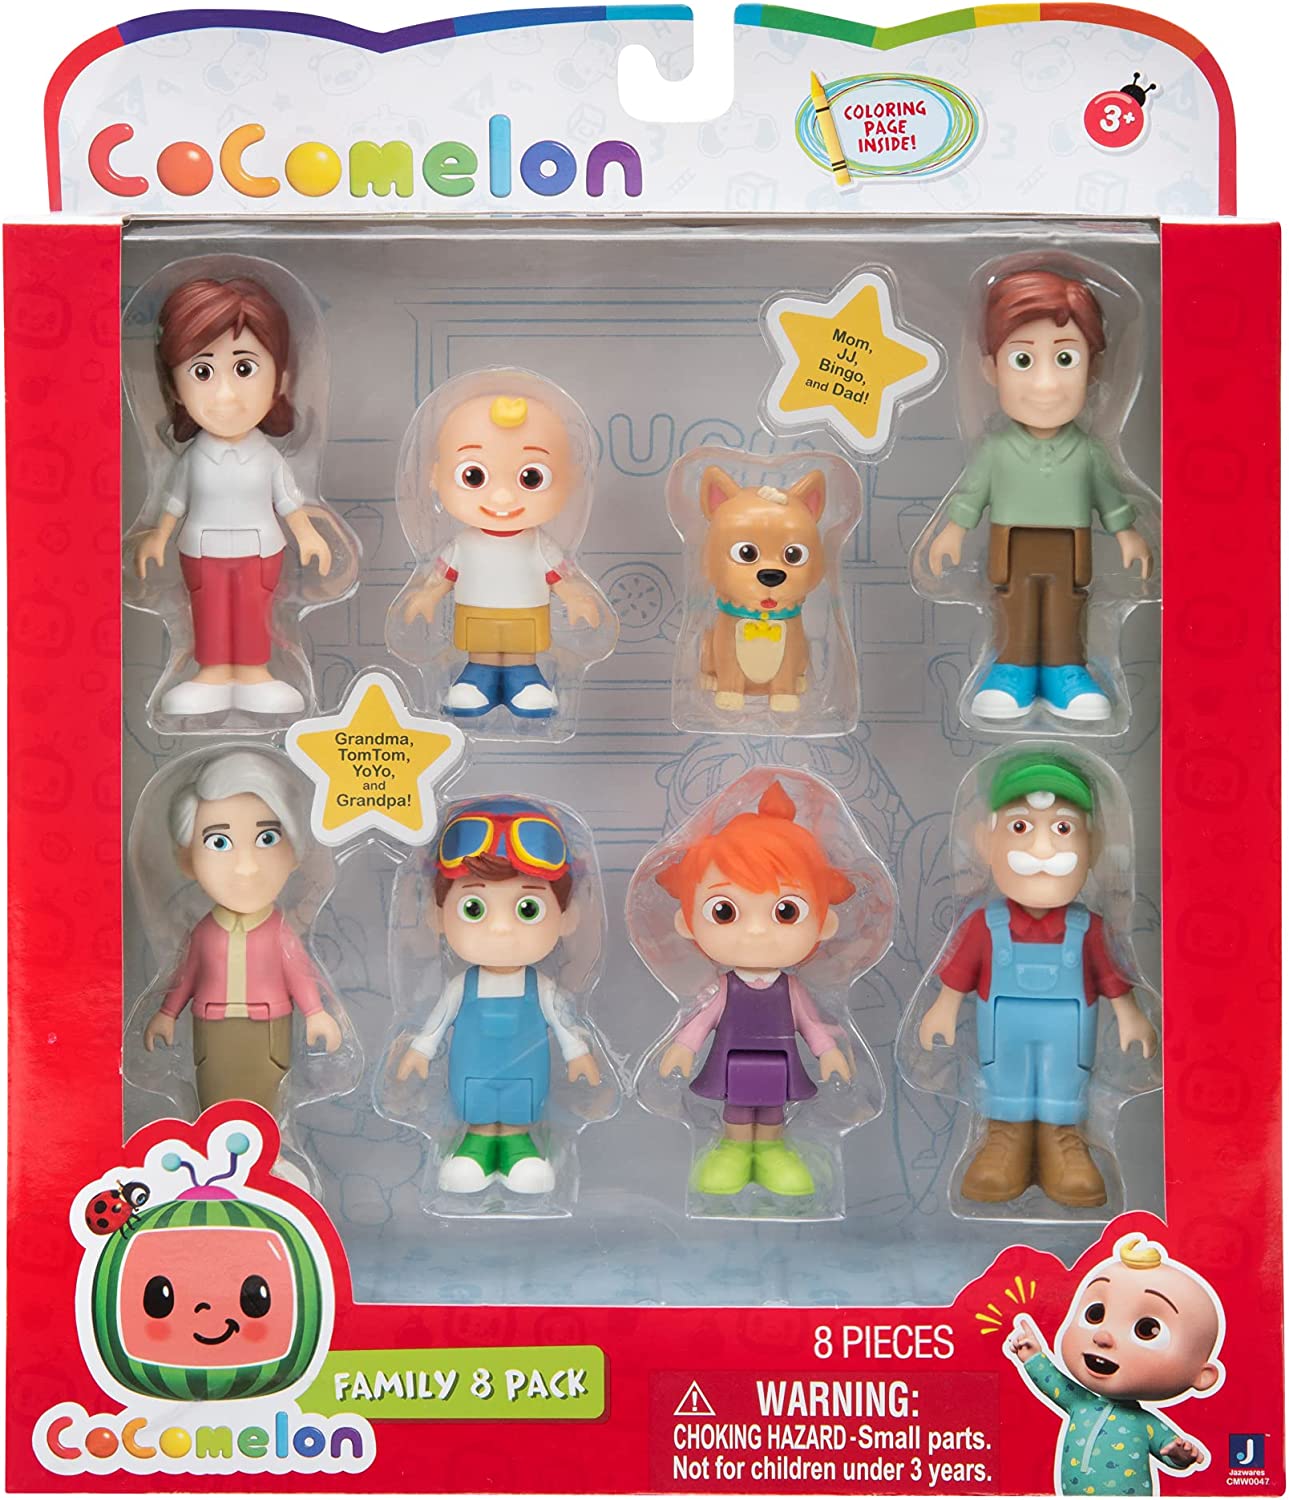 Cocomelon 4 Figure Pack - JJ & Family Figure Set - Family and Friends -  Includes JJ, YoYo, Tomtom, and Bingo The Dog - Toys for Kids, Infants and